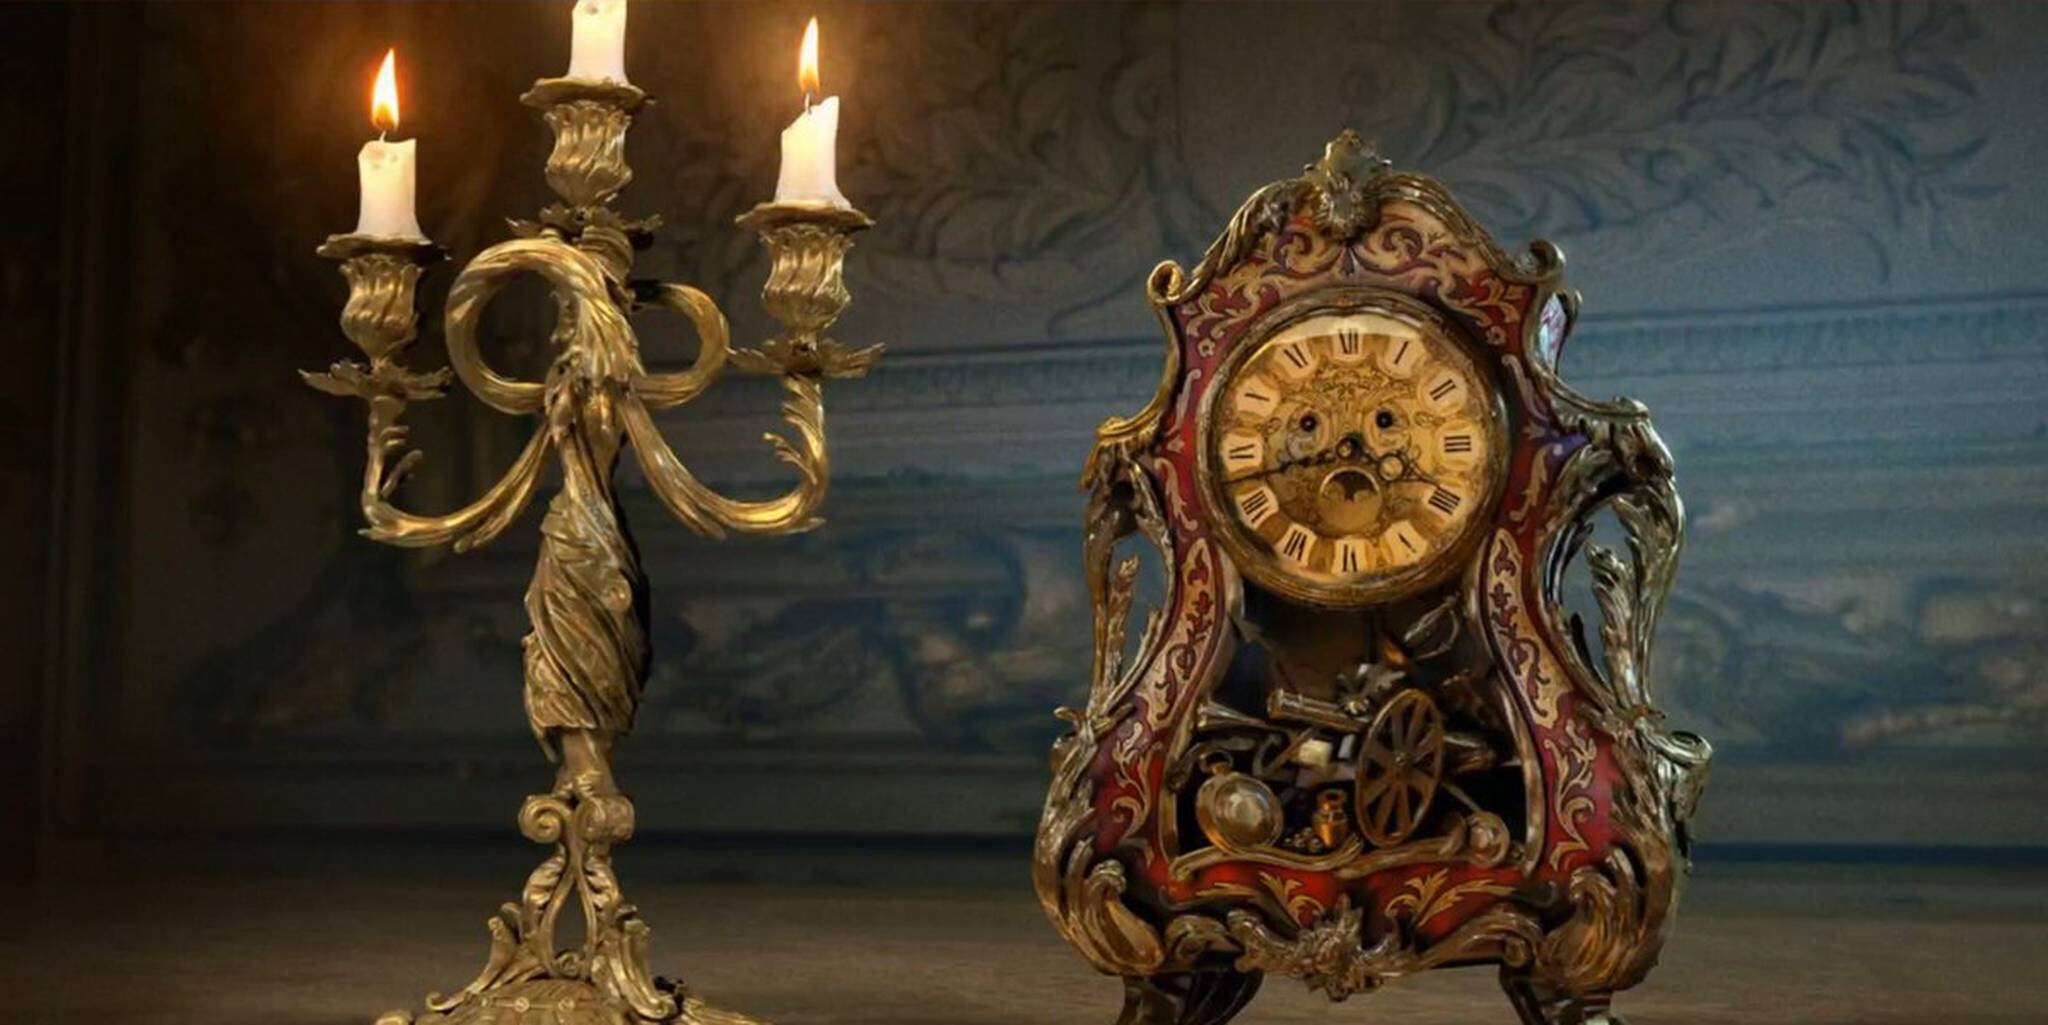 Take a Look at a Sneak Peek of Disney’s “Beauty and the Beast”